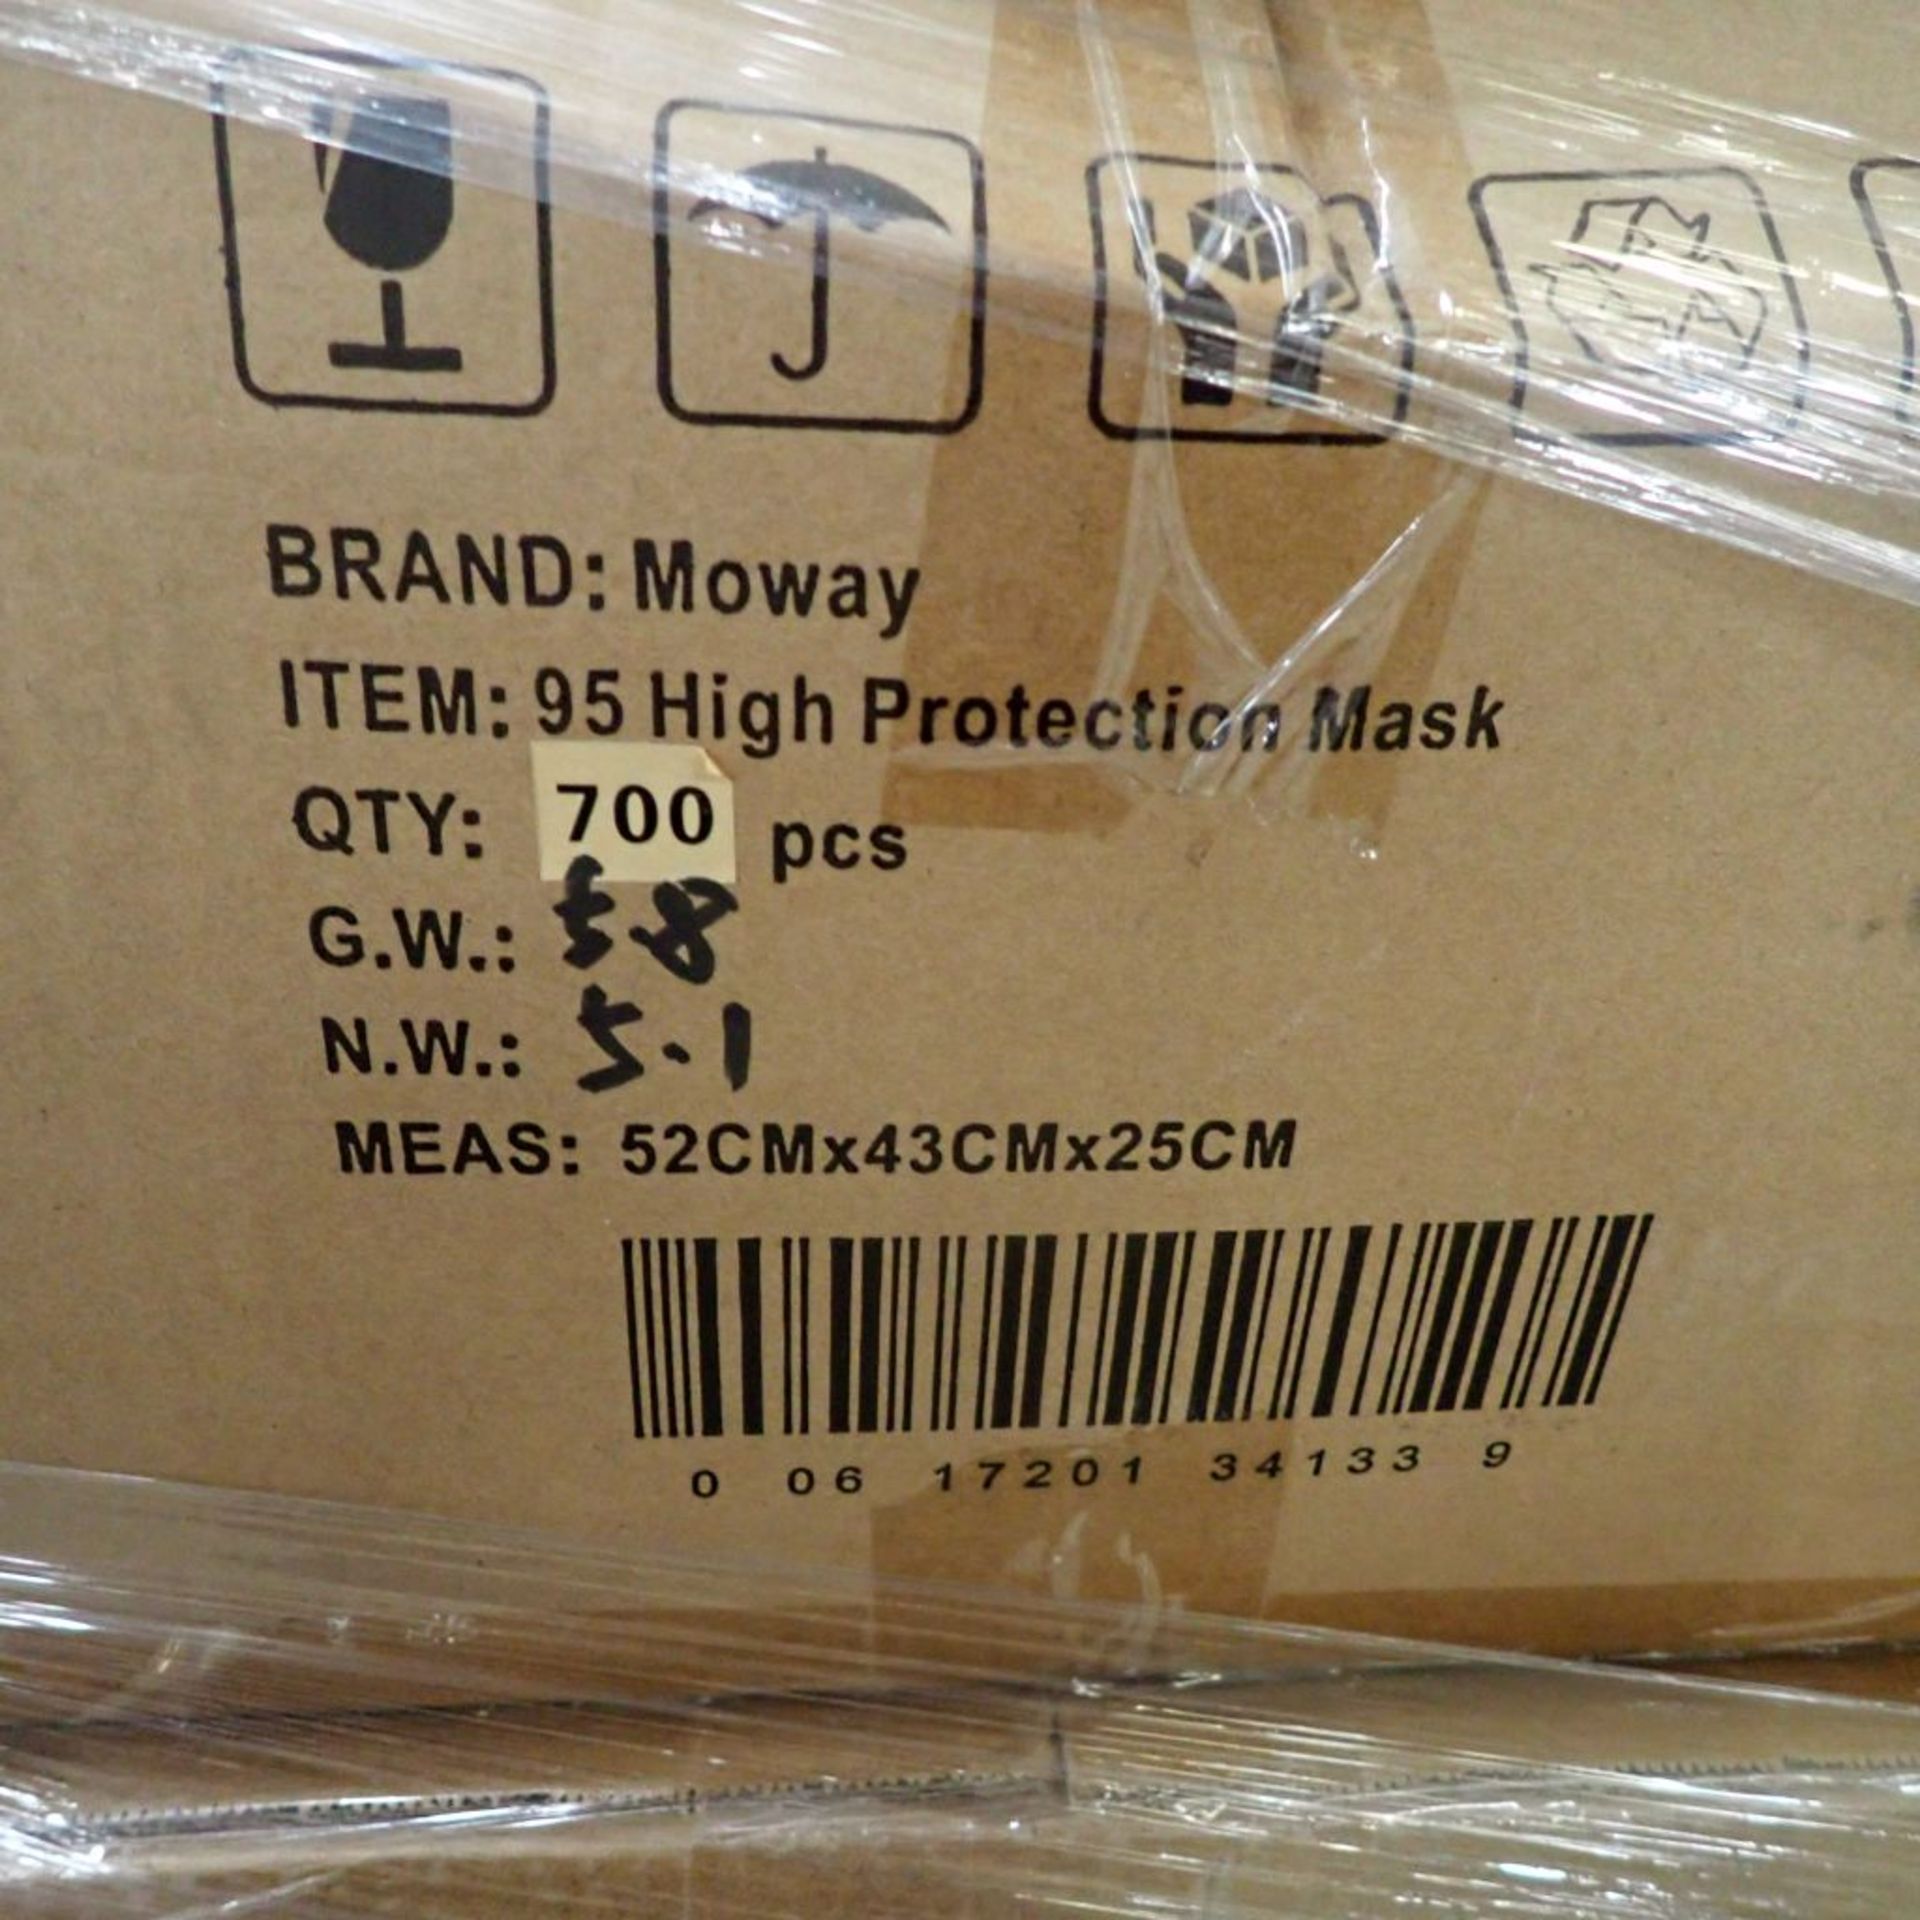 Lot of (29,400) Moway 95 High Protection Mask - Image 3 of 3